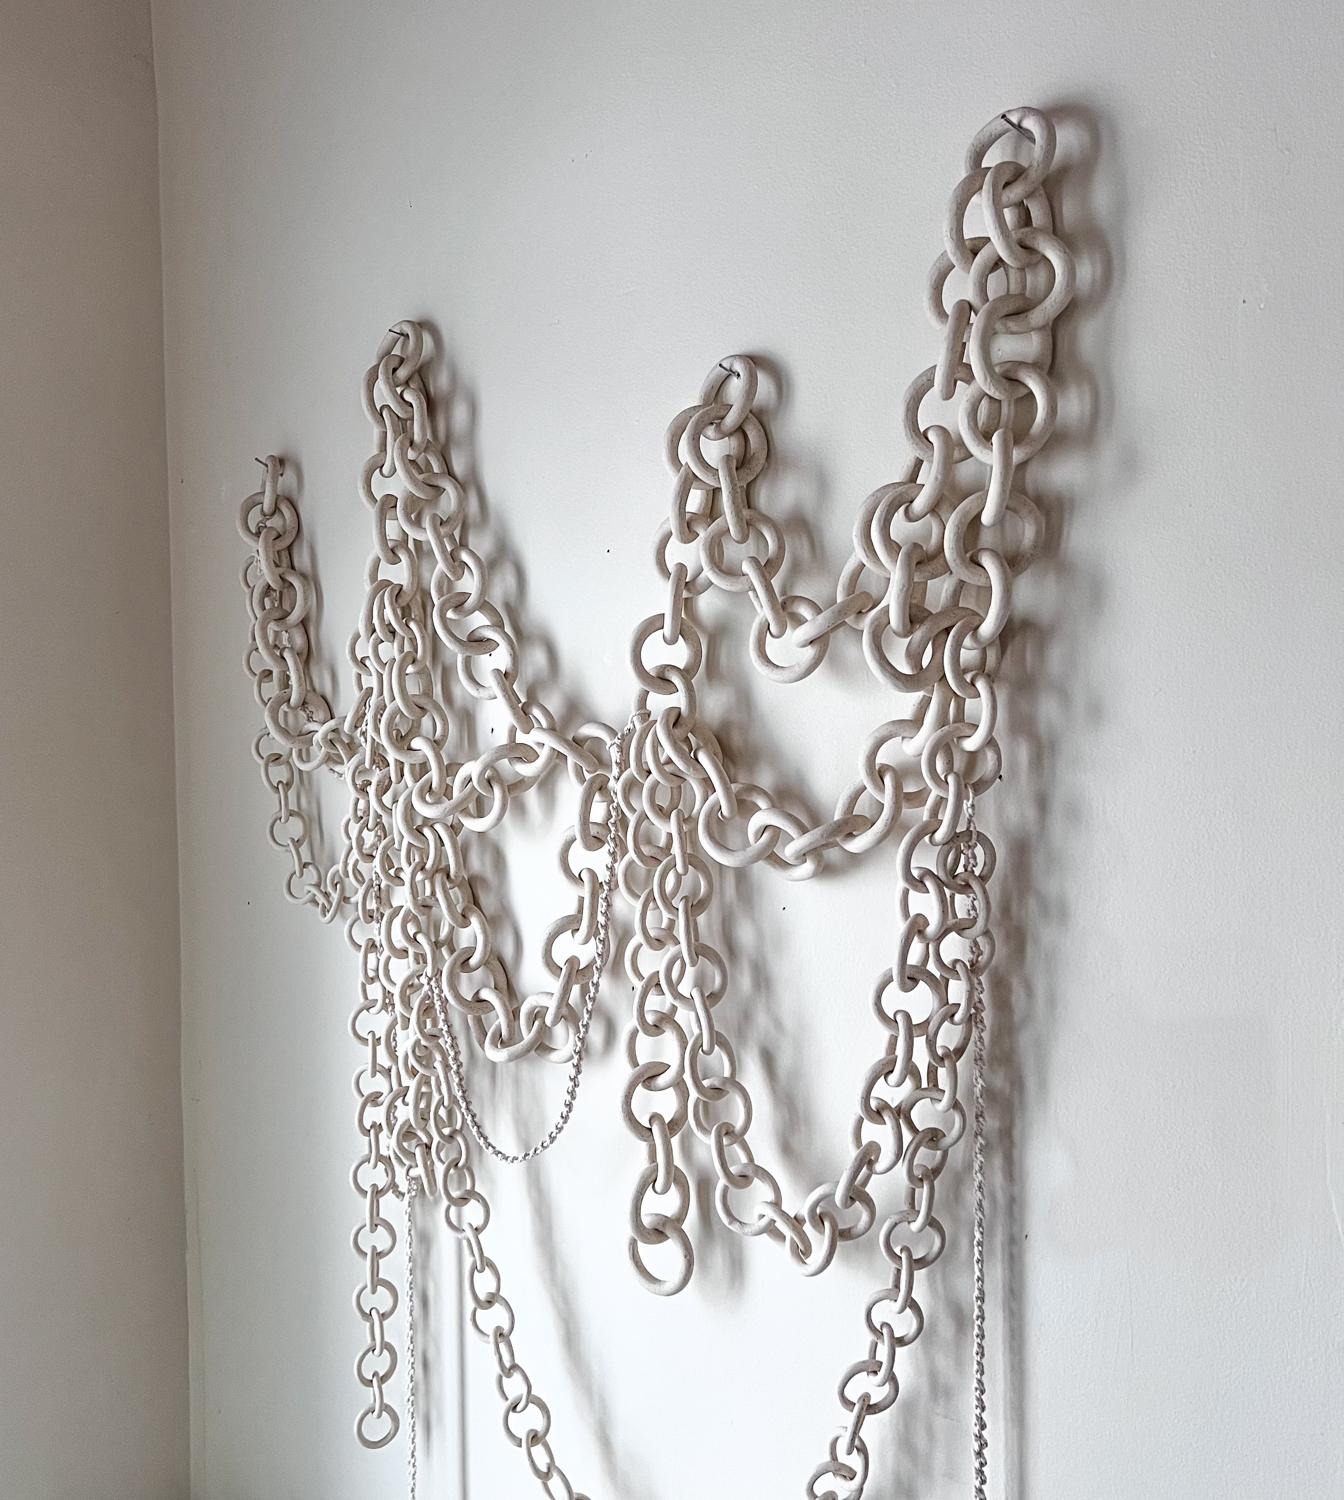 Ceramic Link Chain Wall Sculpture In New Condition For Sale In Stoughton, MA